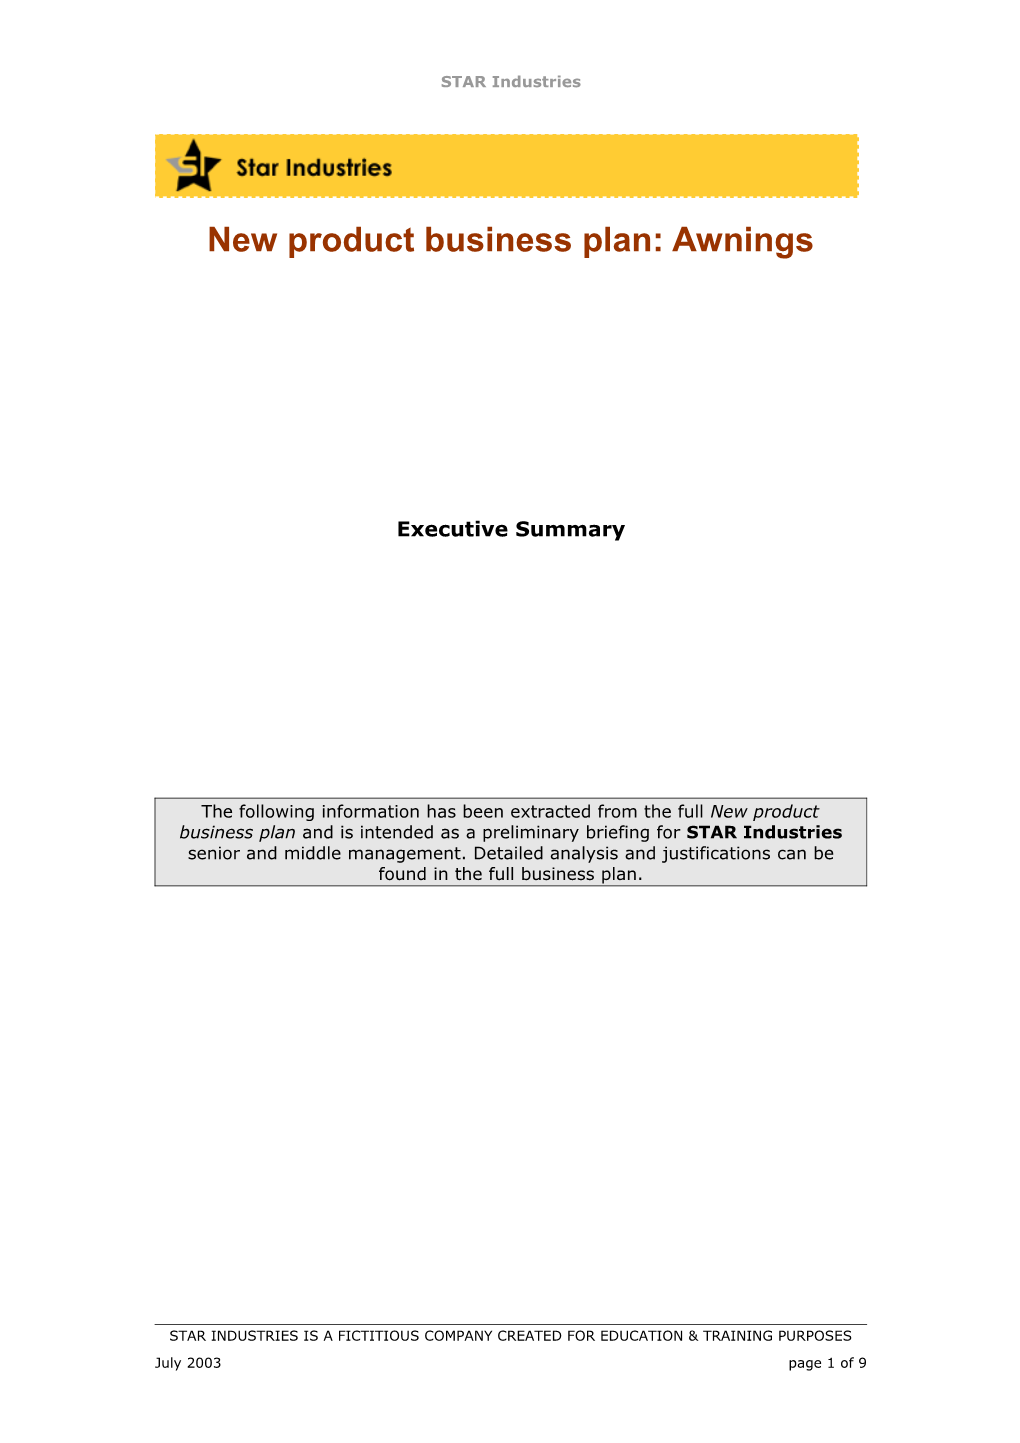 New Product Business Plan: Awnings